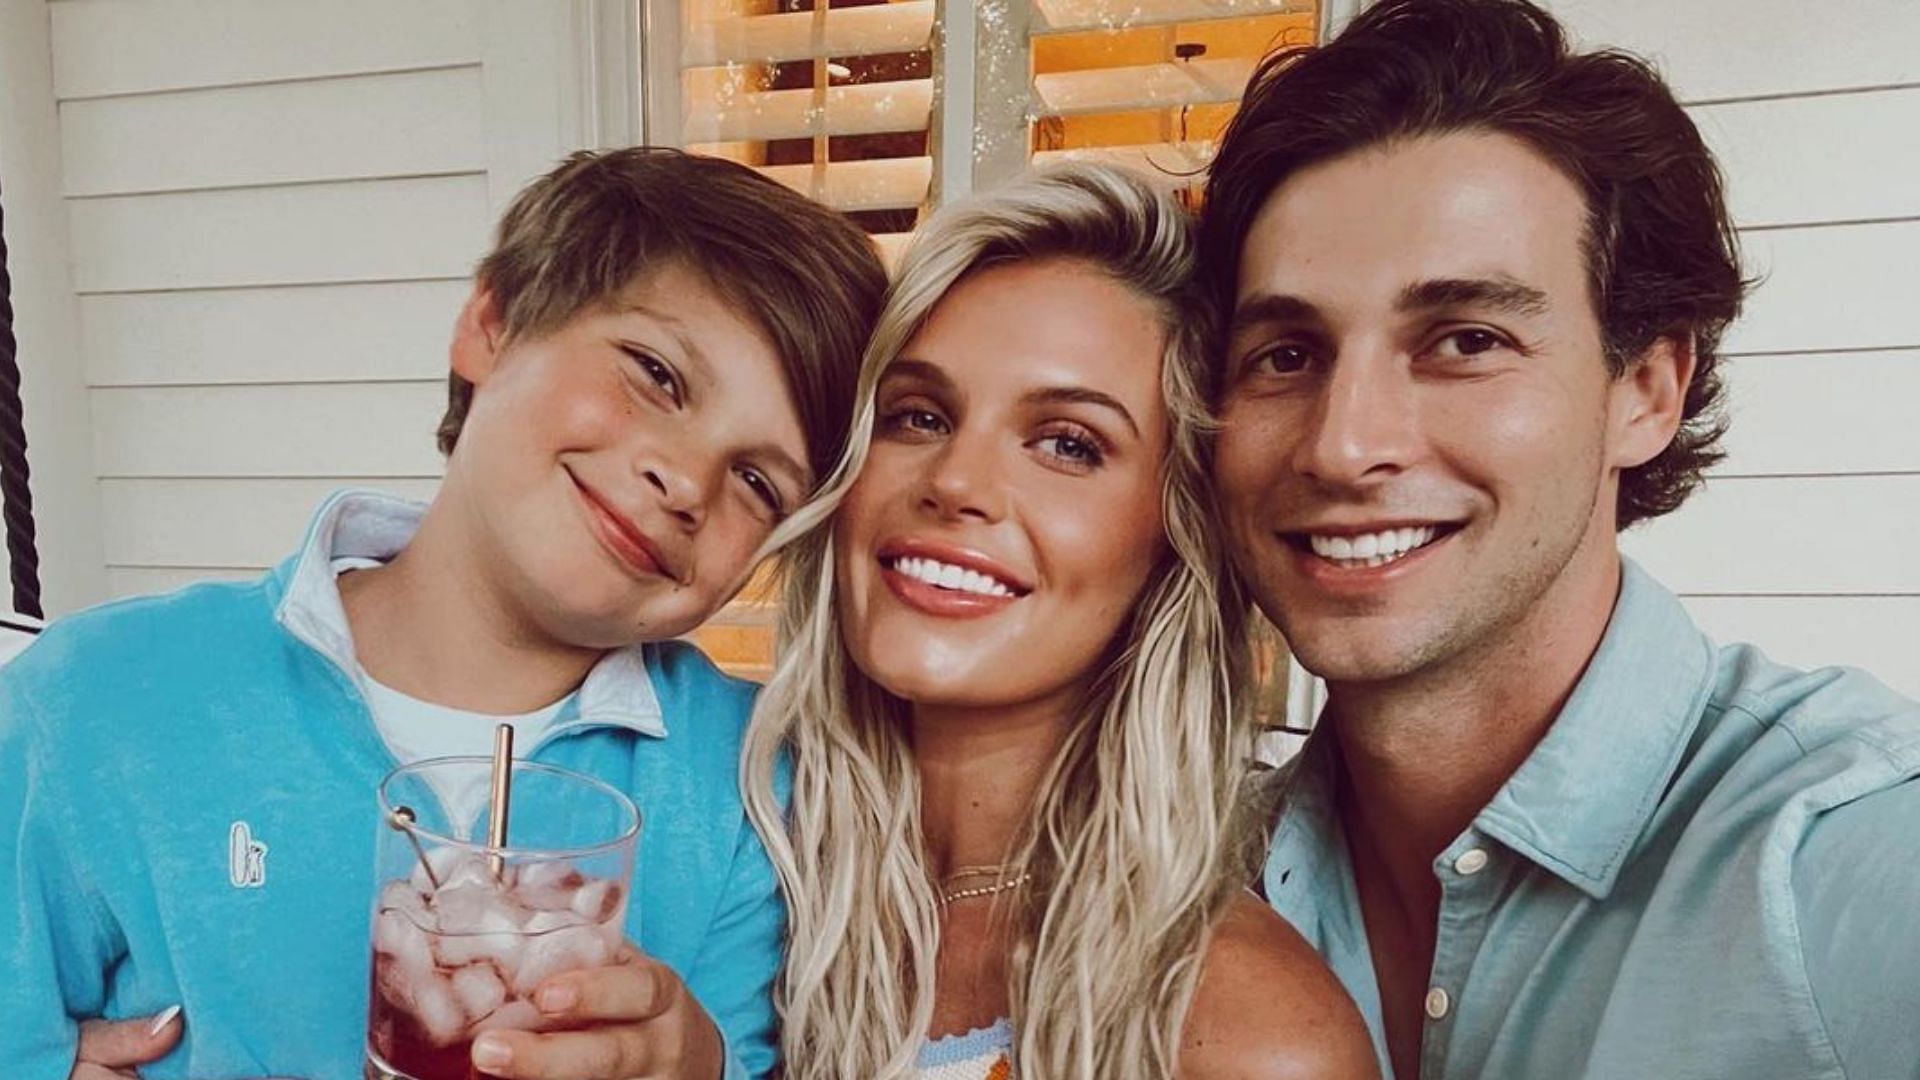 Southern Charm star Madison LeCroy gets married to Brett Randle (Image via madison.lecroy/Instagram)